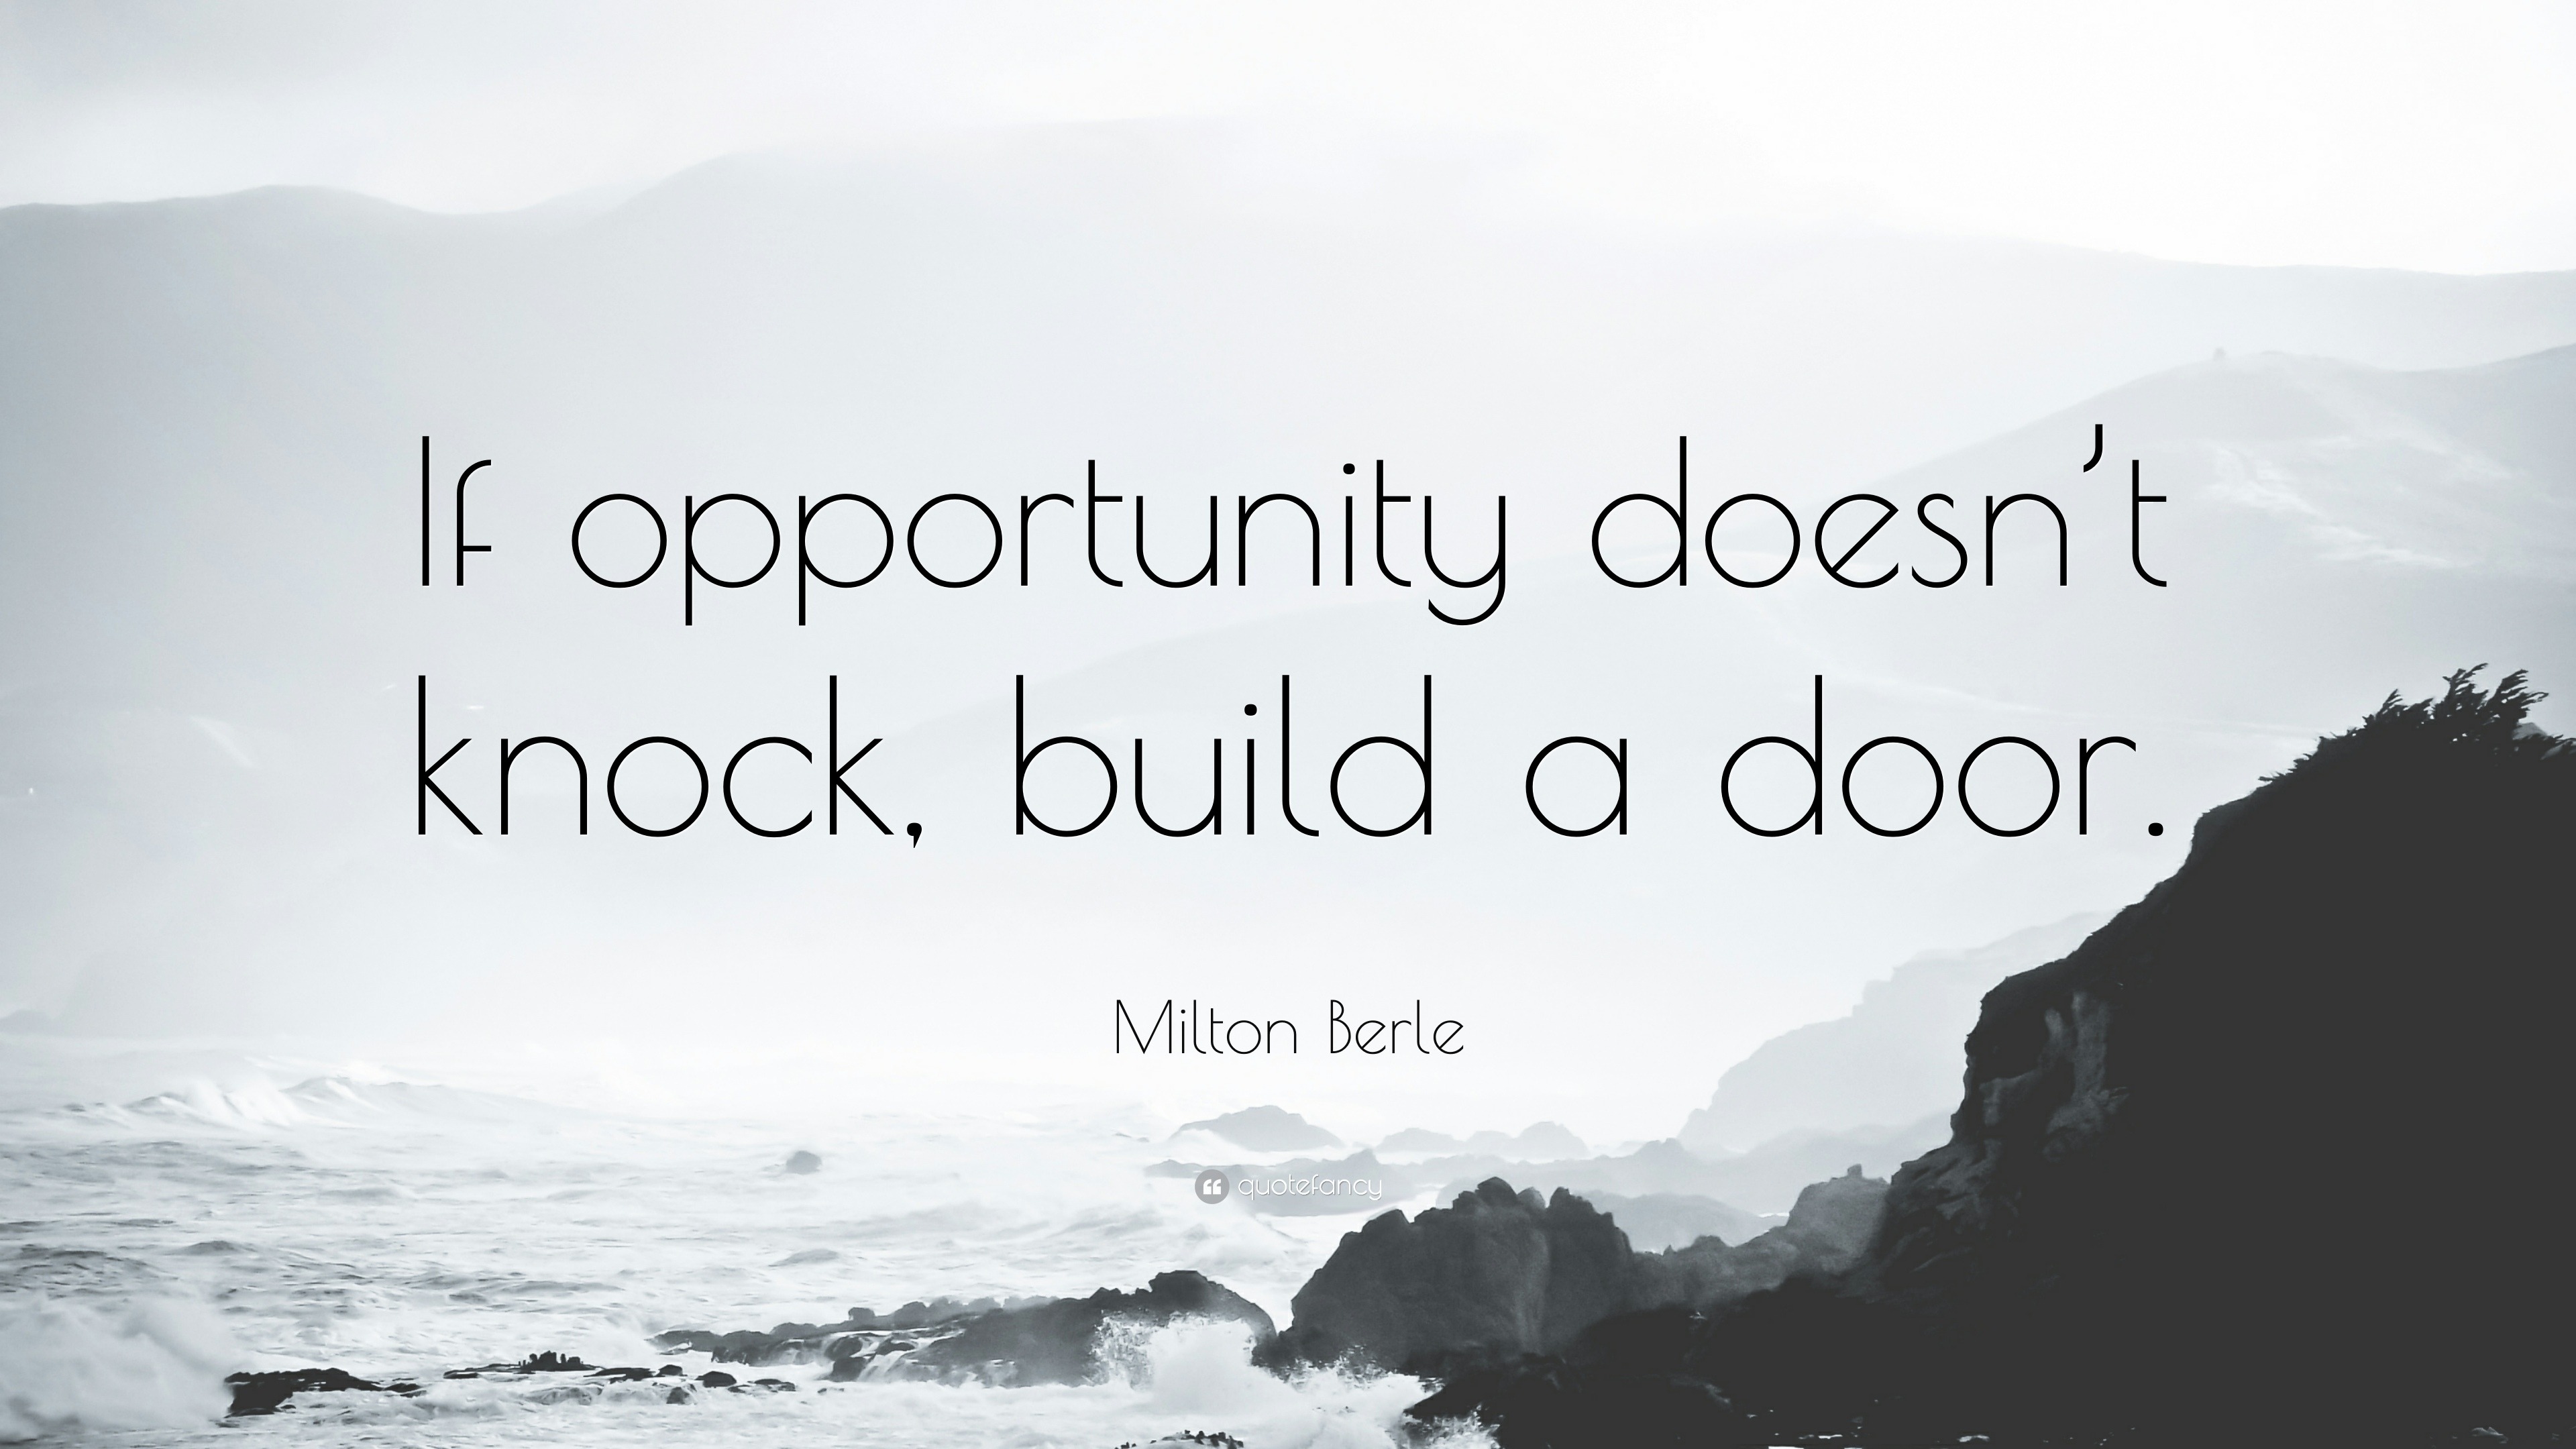 1701267 Milton Berle Quote If opportunity doesn t knock build a door